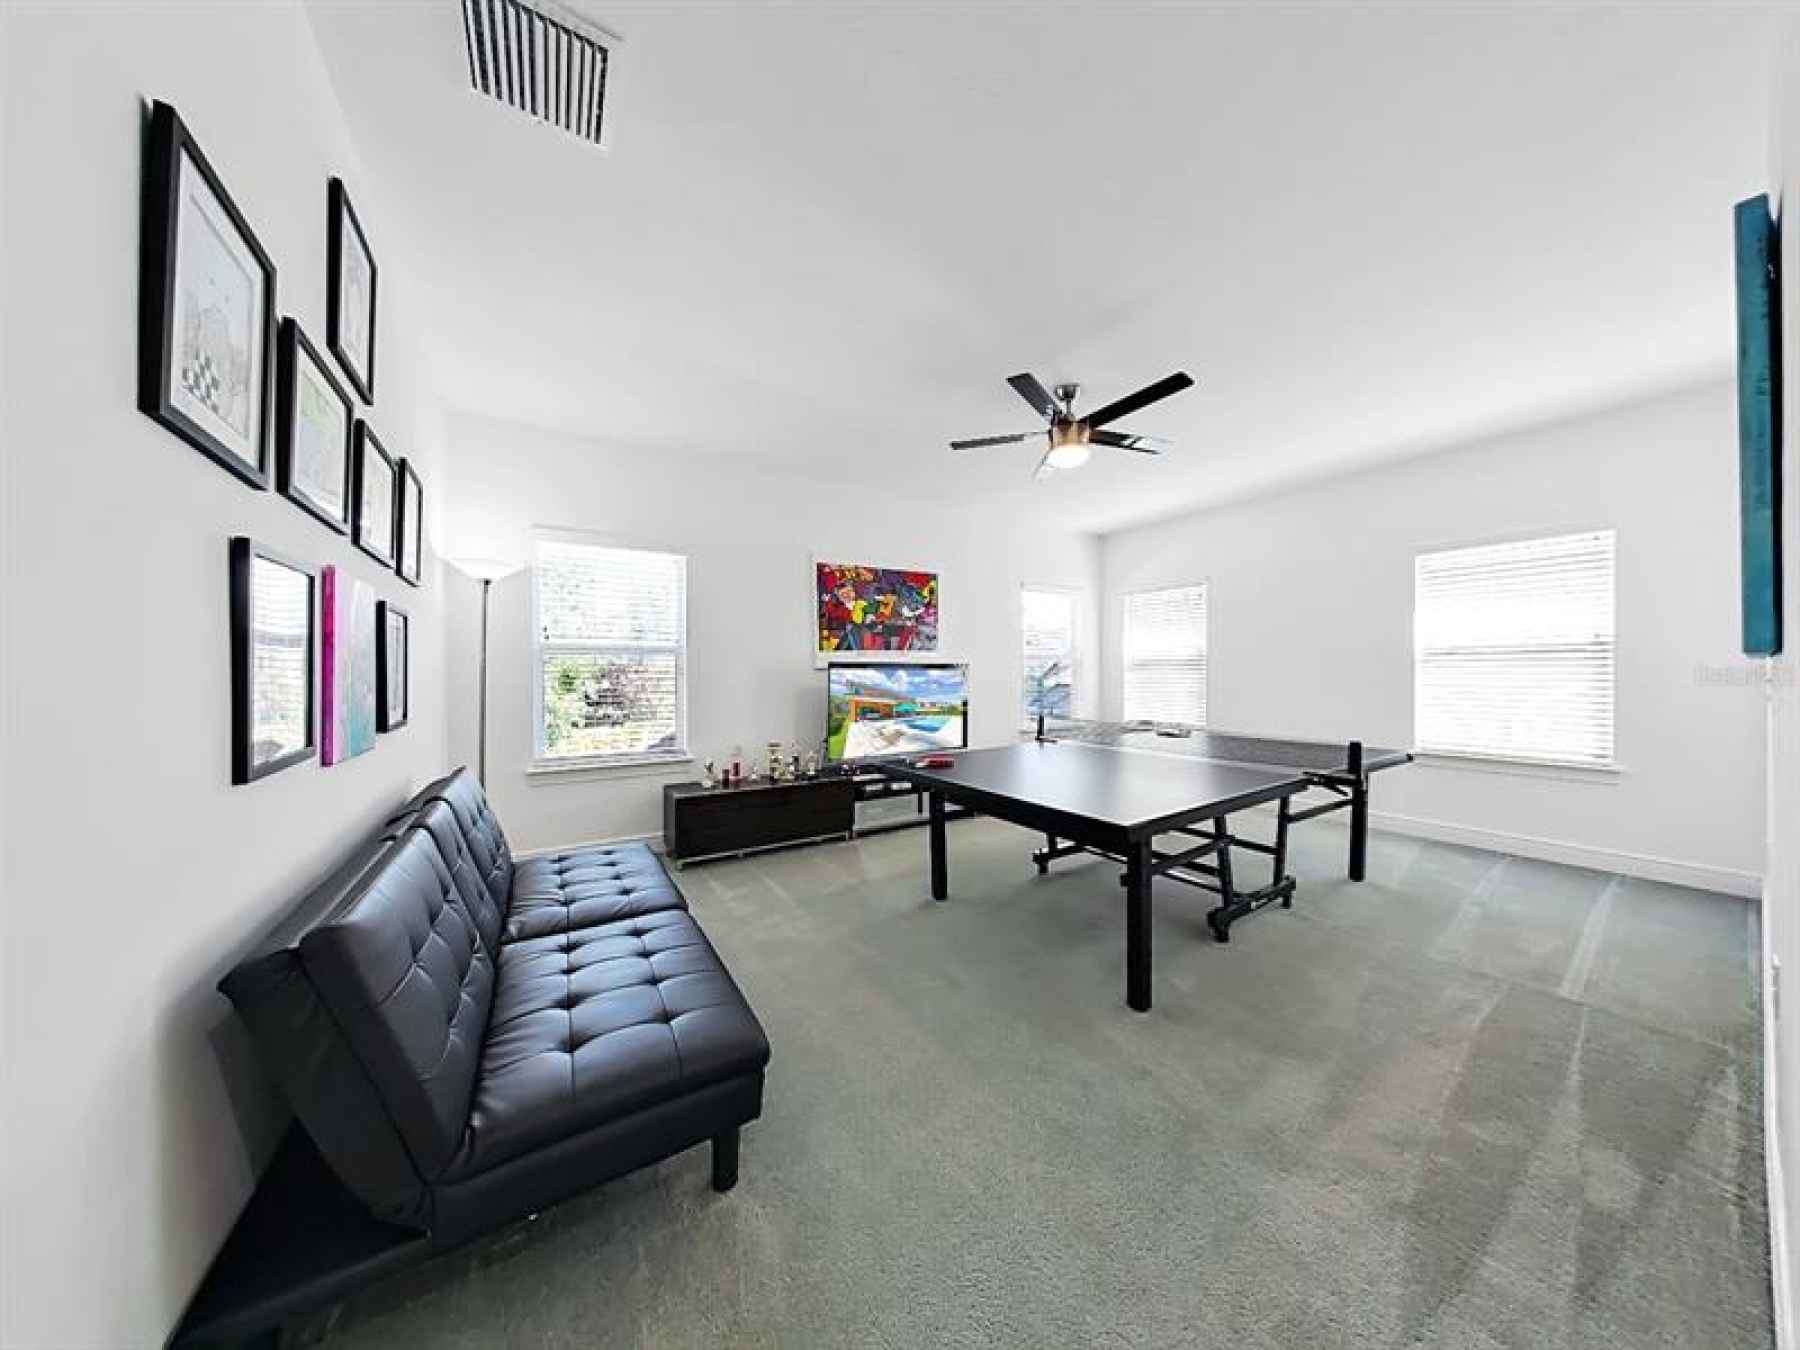 Bonus room/loft - 220 sq. ft. dedicated to fun and games.  Plenty of room for a pool table.